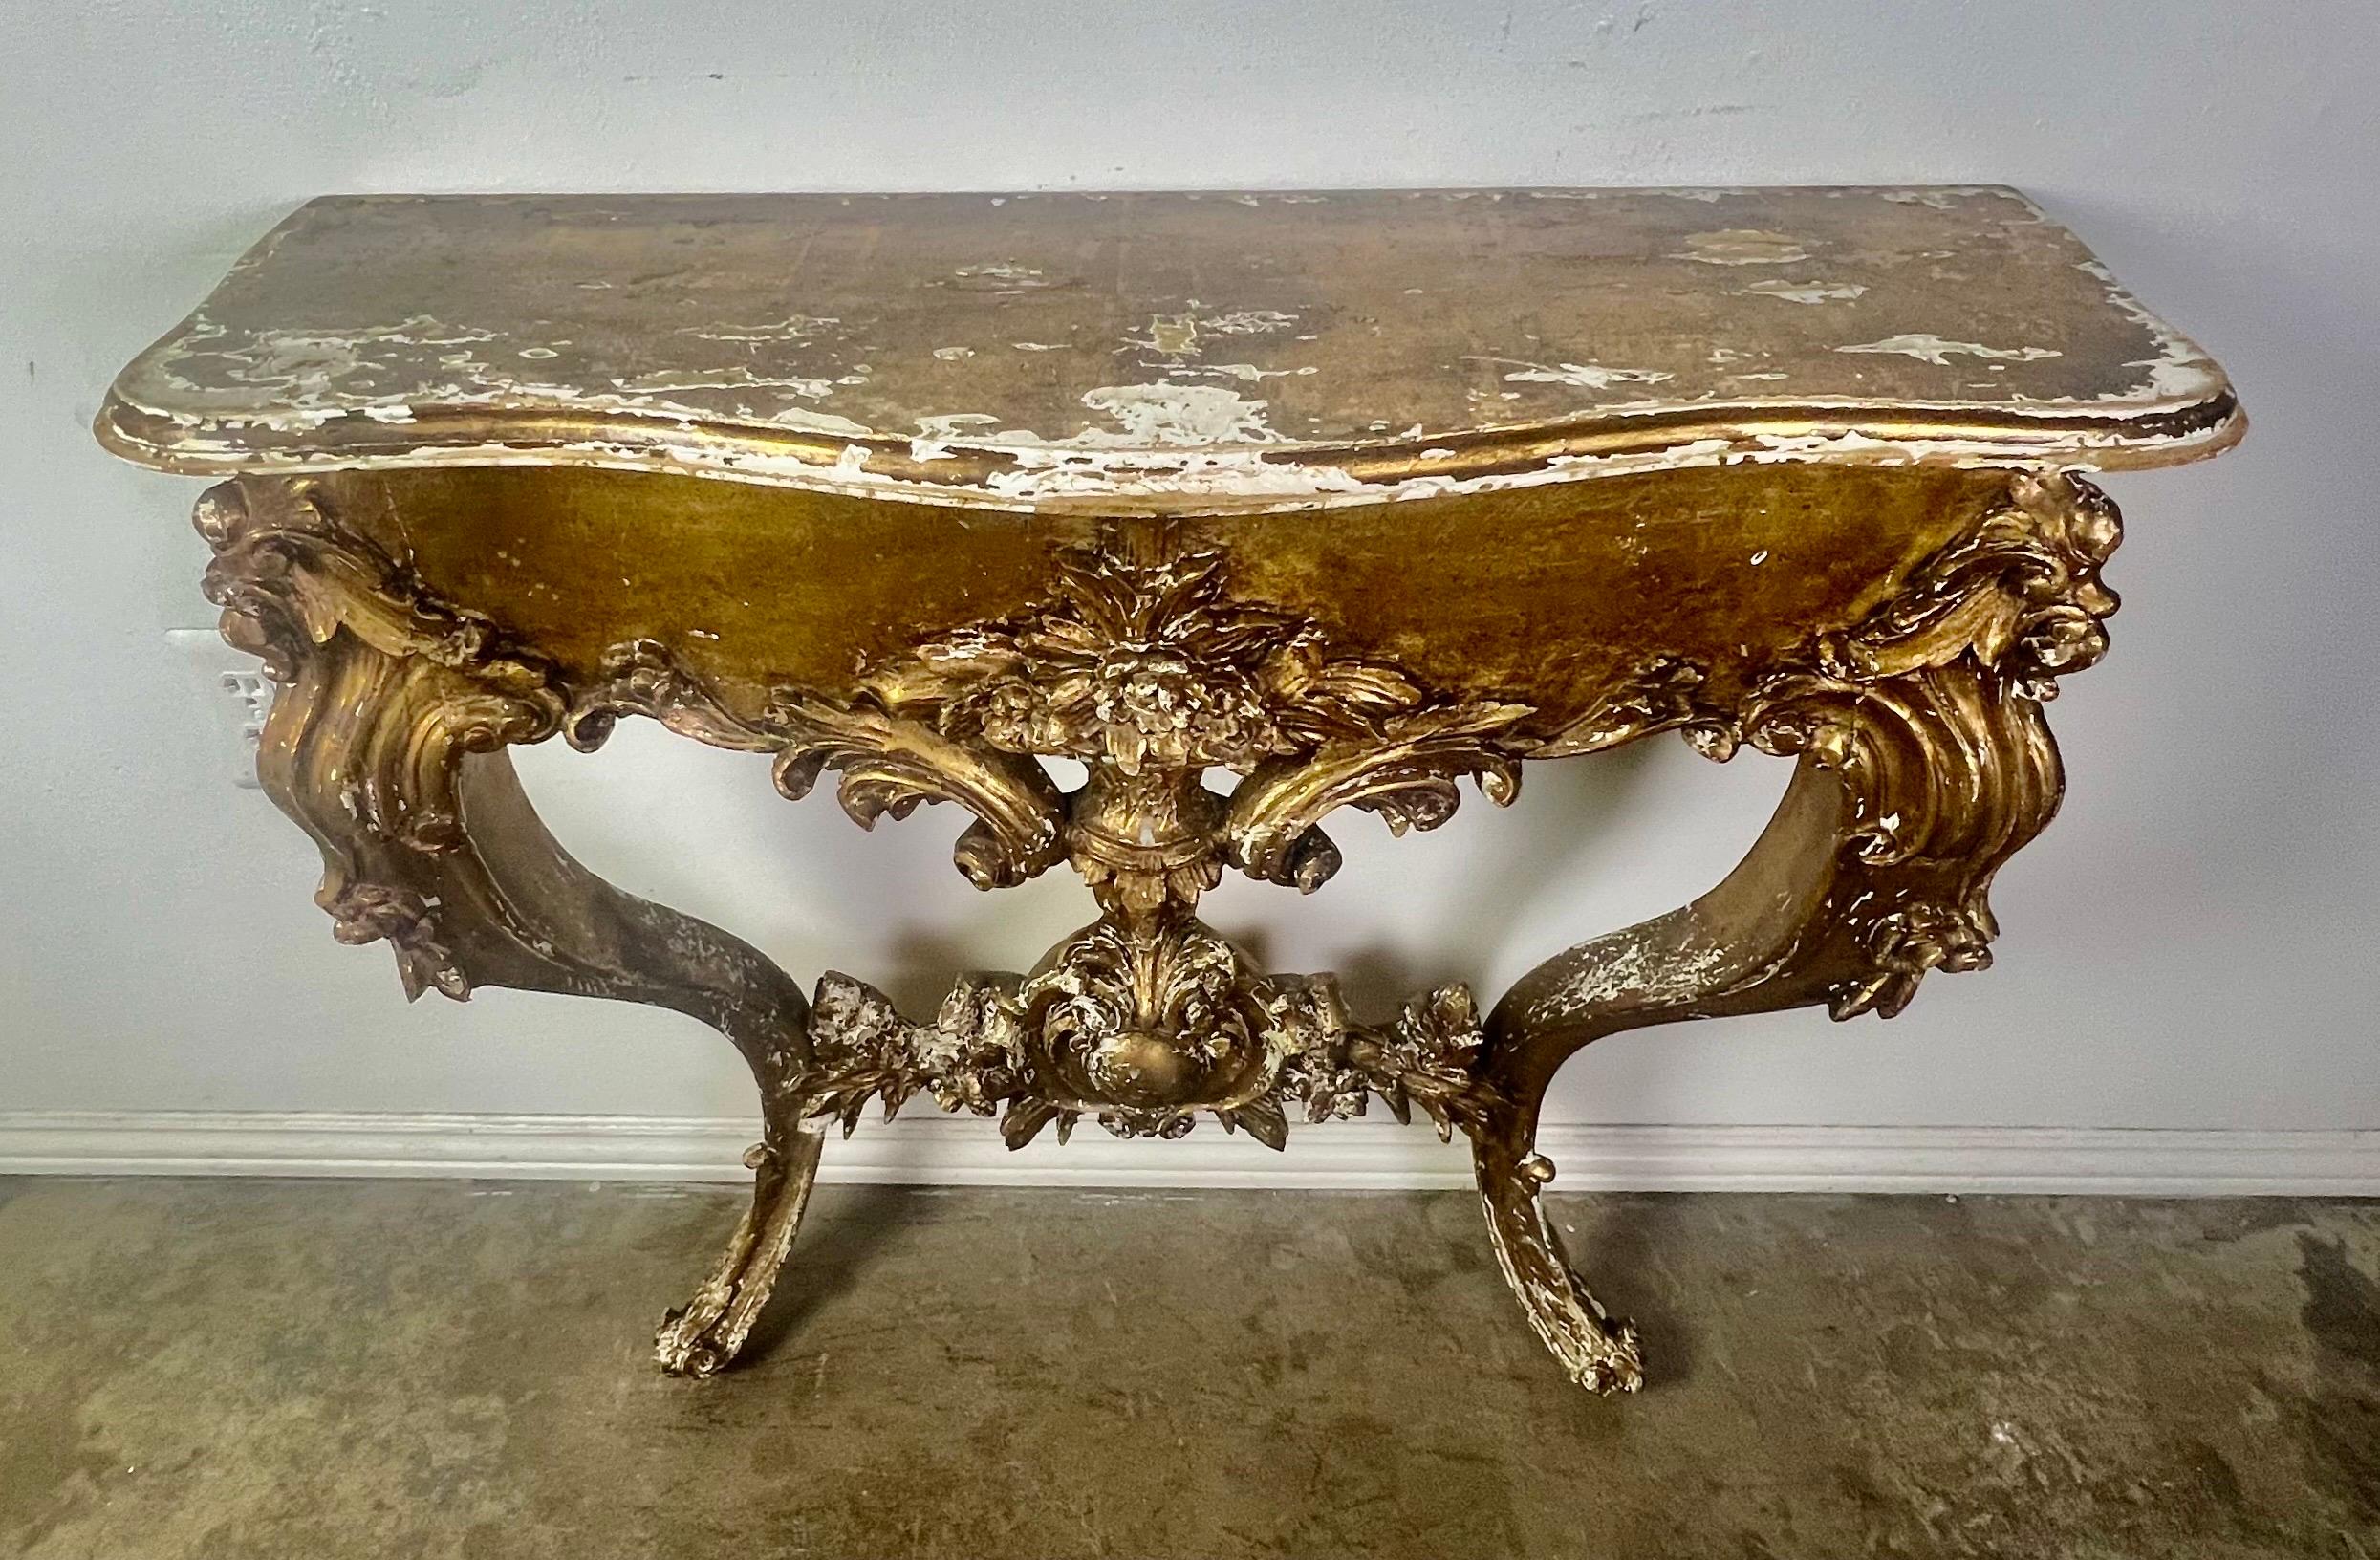 19th-century French Louis XV Giltwood console adorned with intricate carvings depicting acanthus leaves, roses, and other detailed elements.  The console stands on cabriole legs that end in rams head feet.  The distressed finish and missing gold